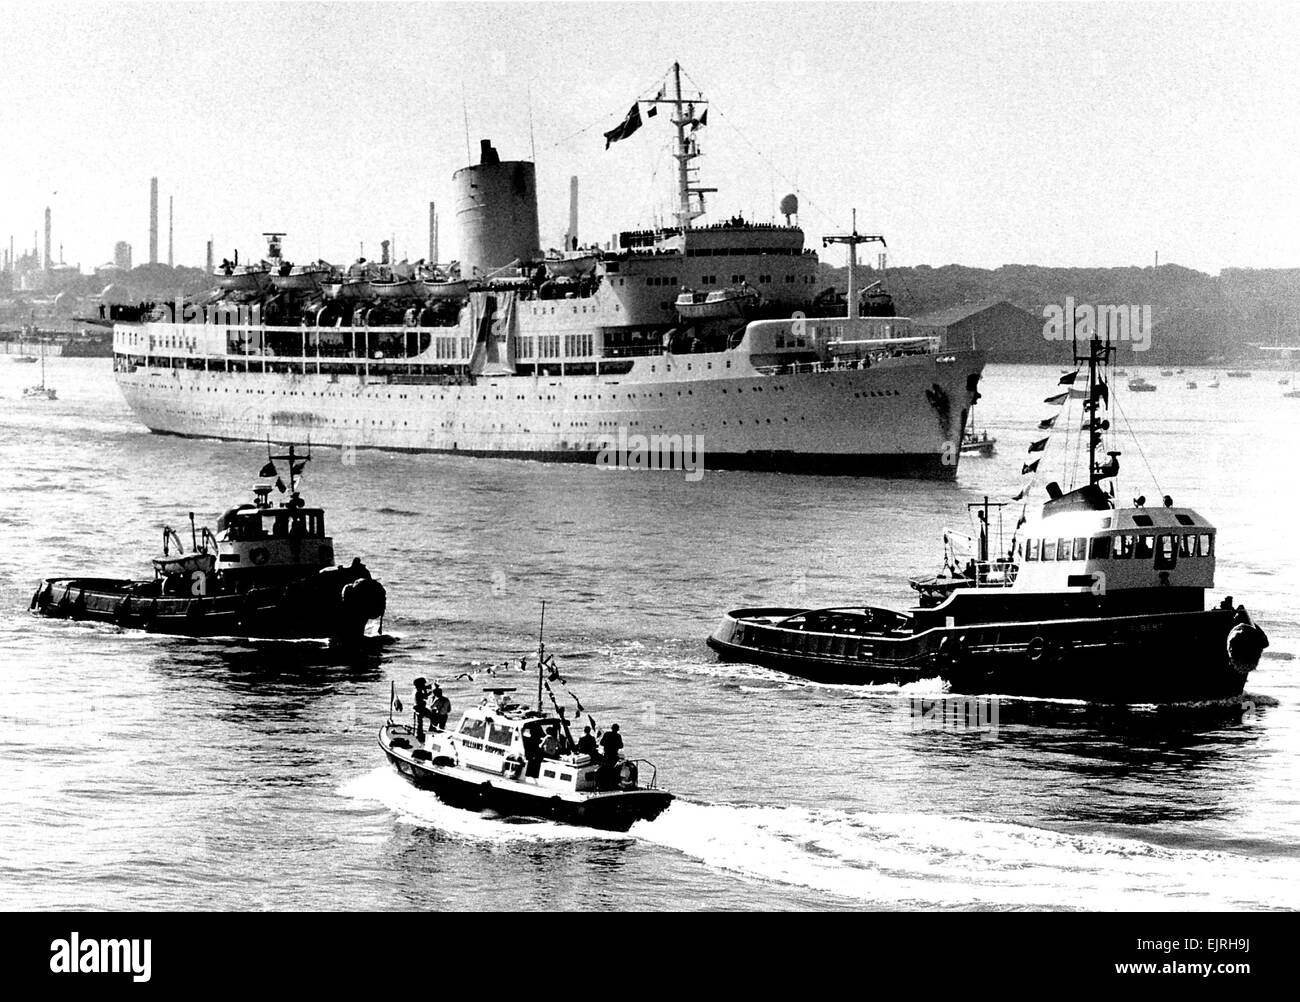 AJAXNETPHOTO - 1982 - SOUTHAMPTON, ENGLAND. - WOUNDED RETURN - THE HOSPITAL SHIP UGANDA RETURNING TO SOUTHAMPTON IN 1982 CARRYING THE WOUNDED FROM THE FALKLAND ISLANDS CONFLICT.  PHOTO:JONATHAN EASTLAND/AJAX.  REF:HD SHI UGANDA 910574. Stock Photo